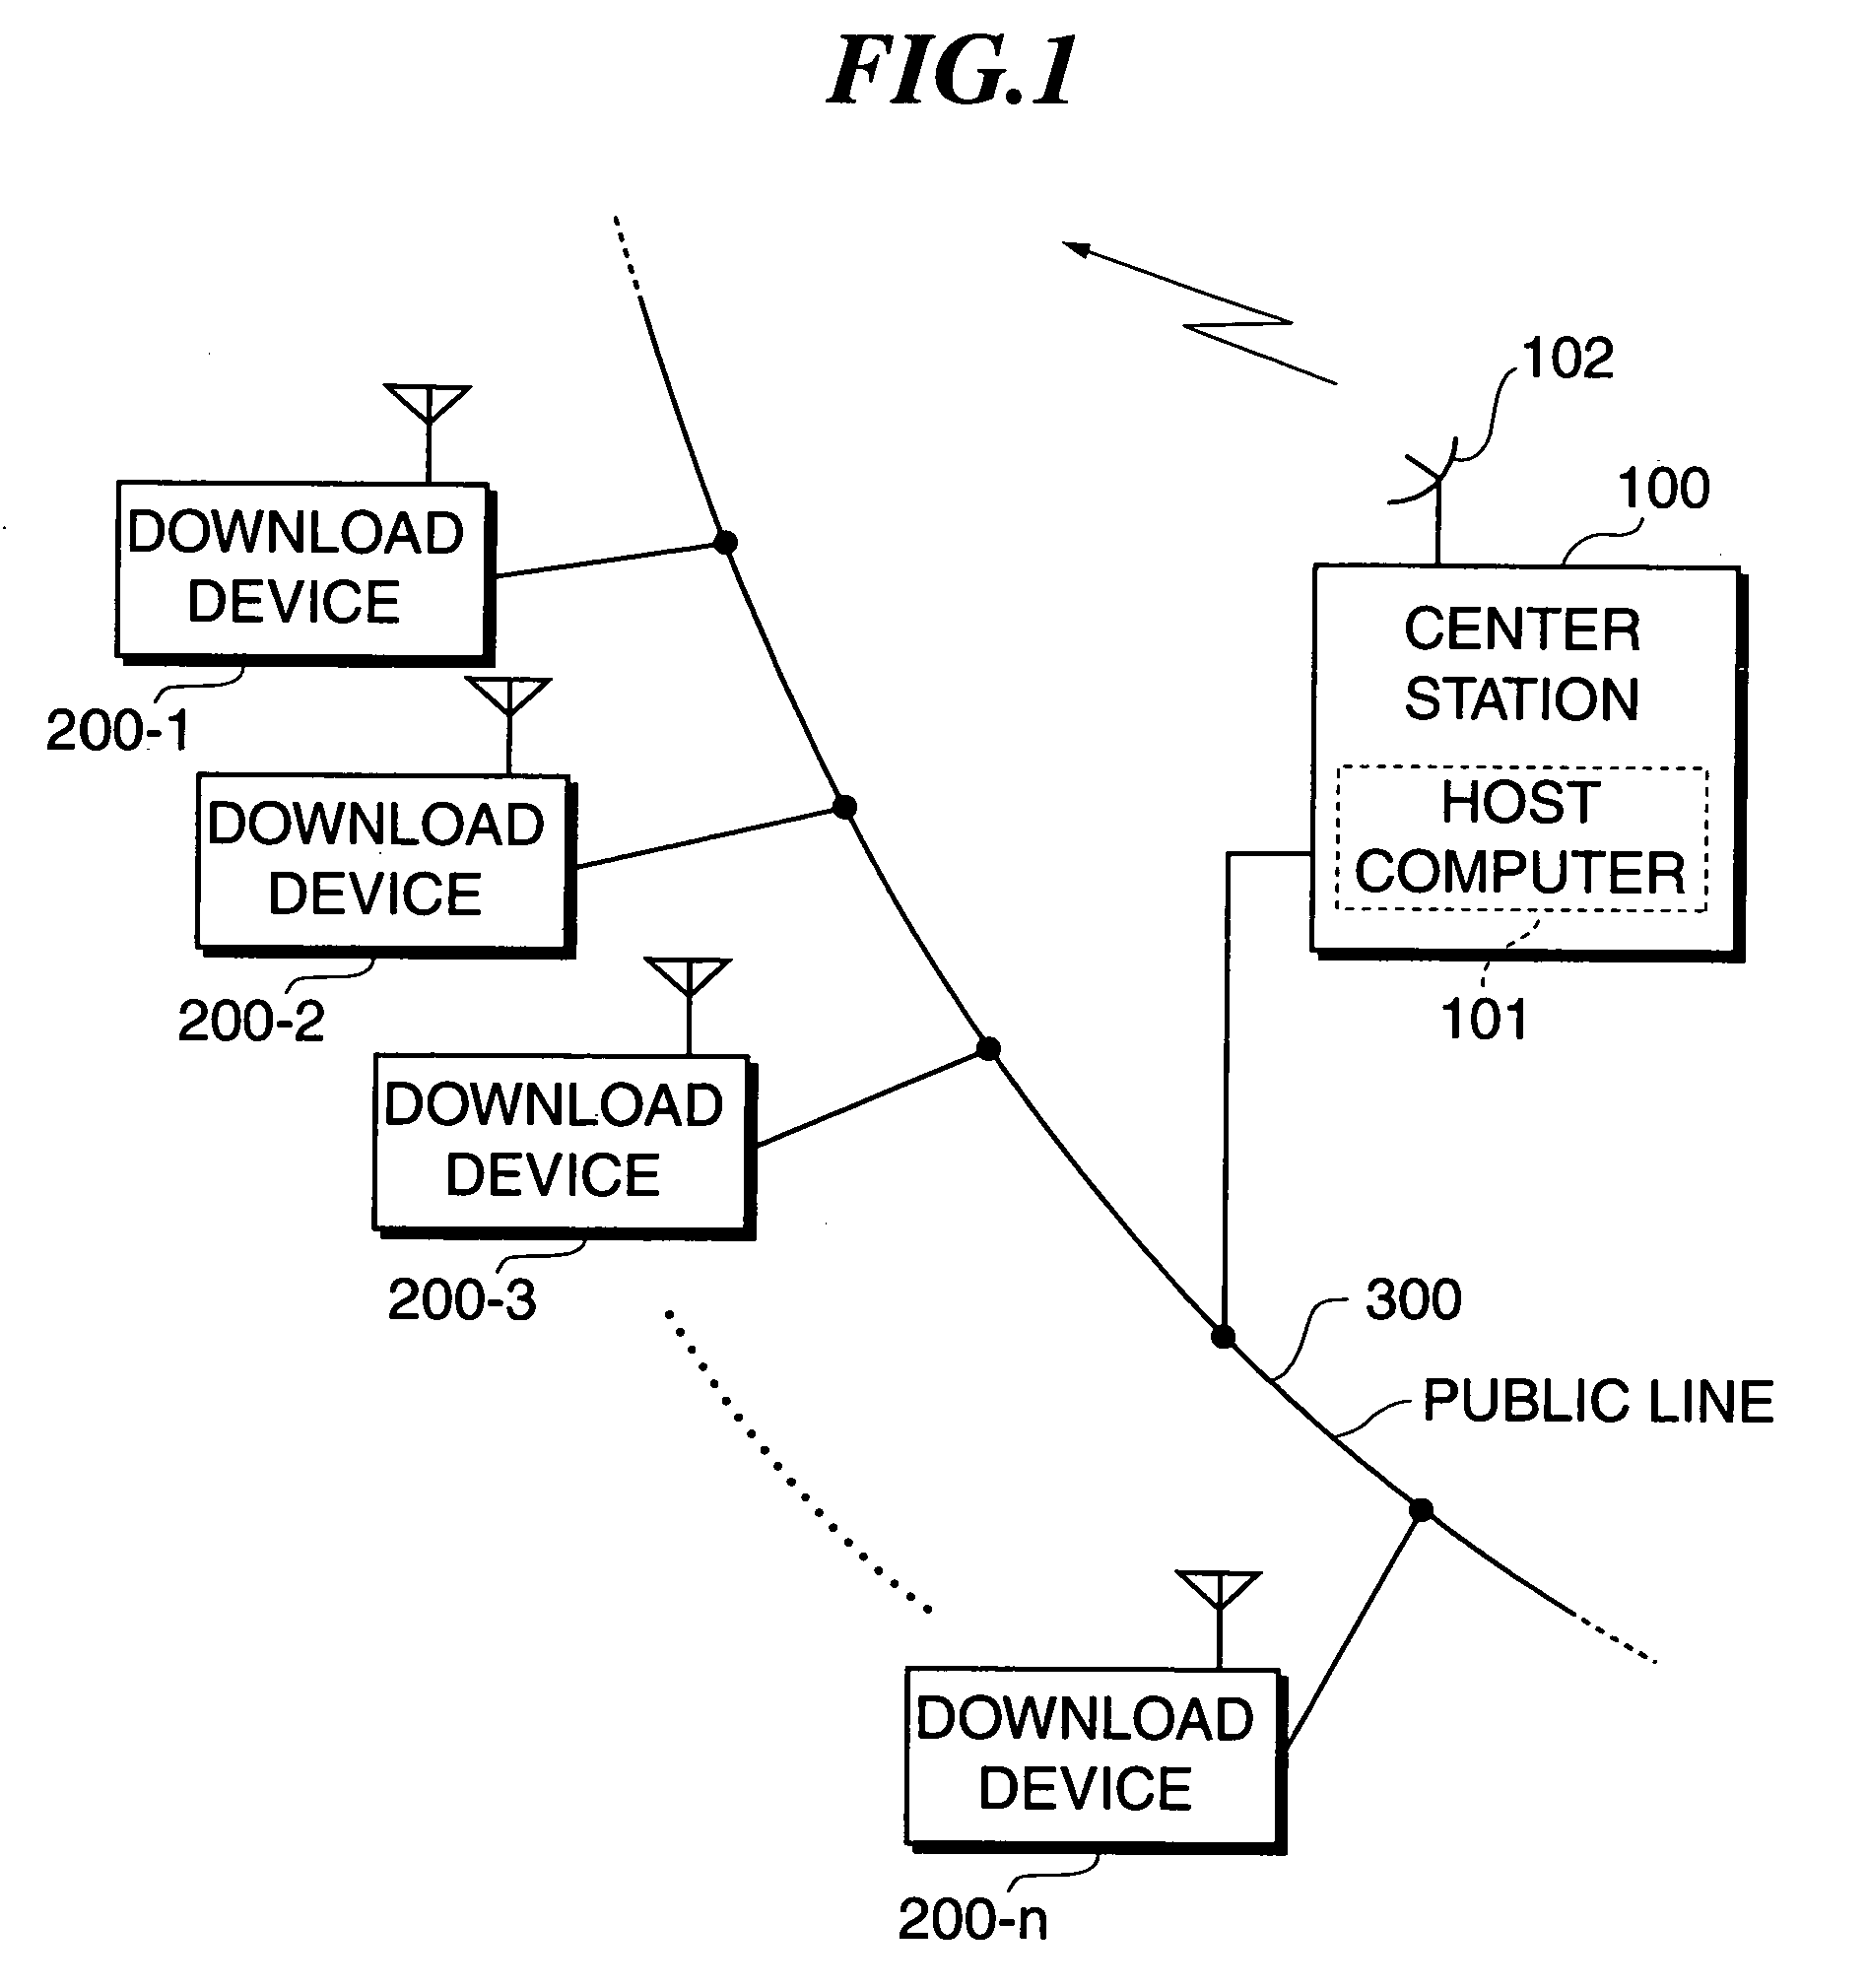 Method and apparatus for downloading data to portable devices